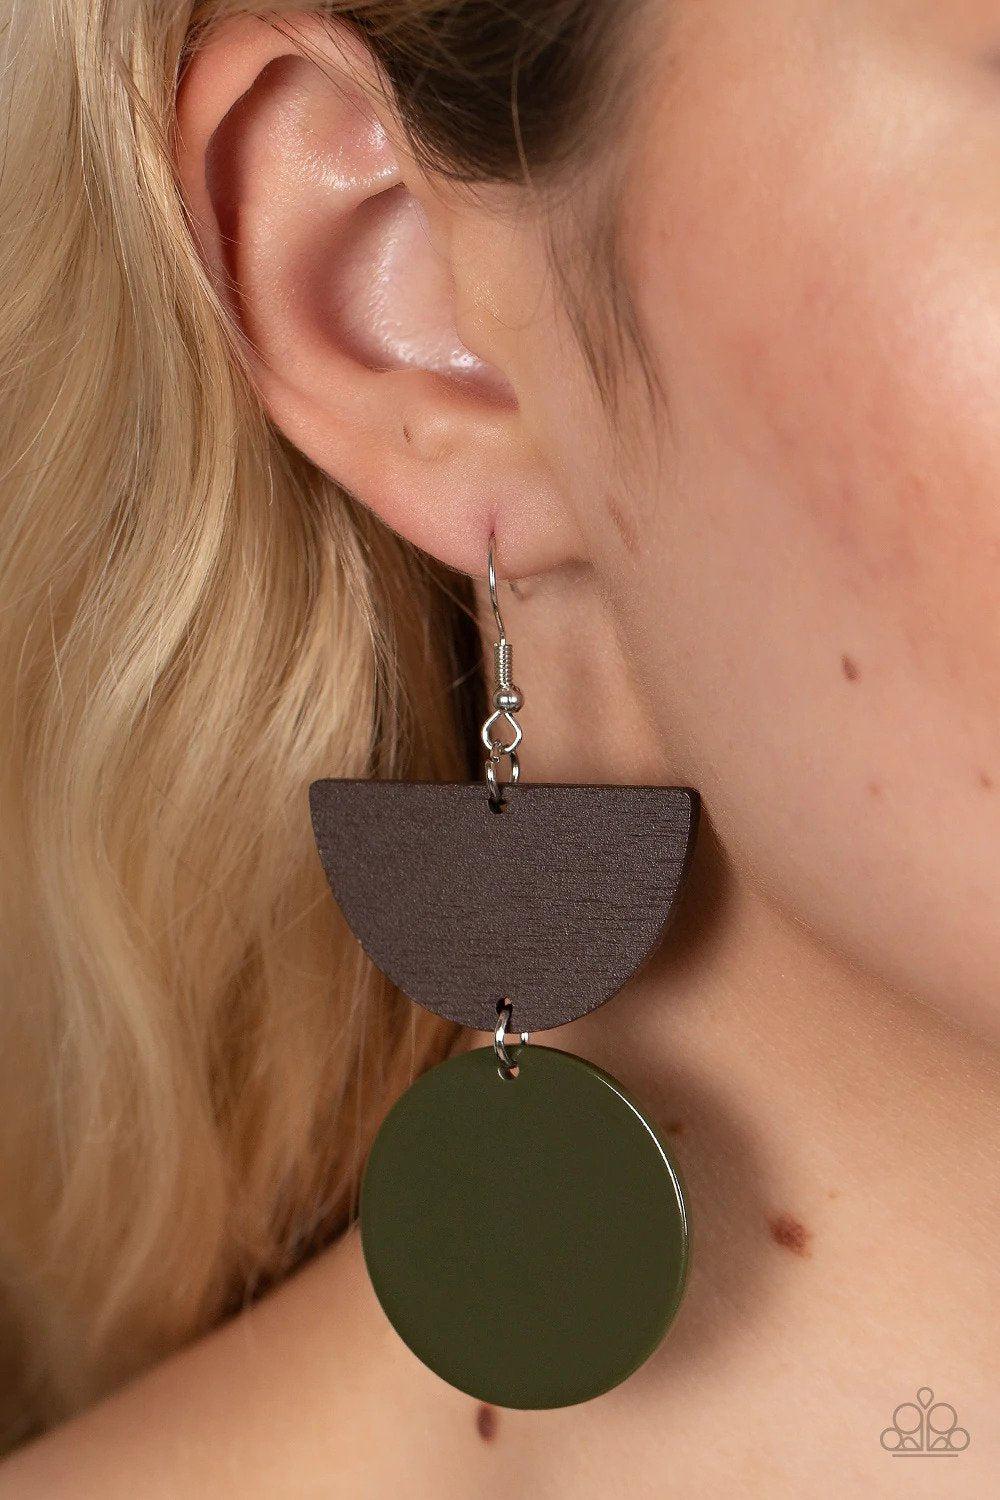 Beach Bistro Green Earrings - Paparazzi Accessories- on model - CarasShop.com - $5 Jewelry by Cara Jewels